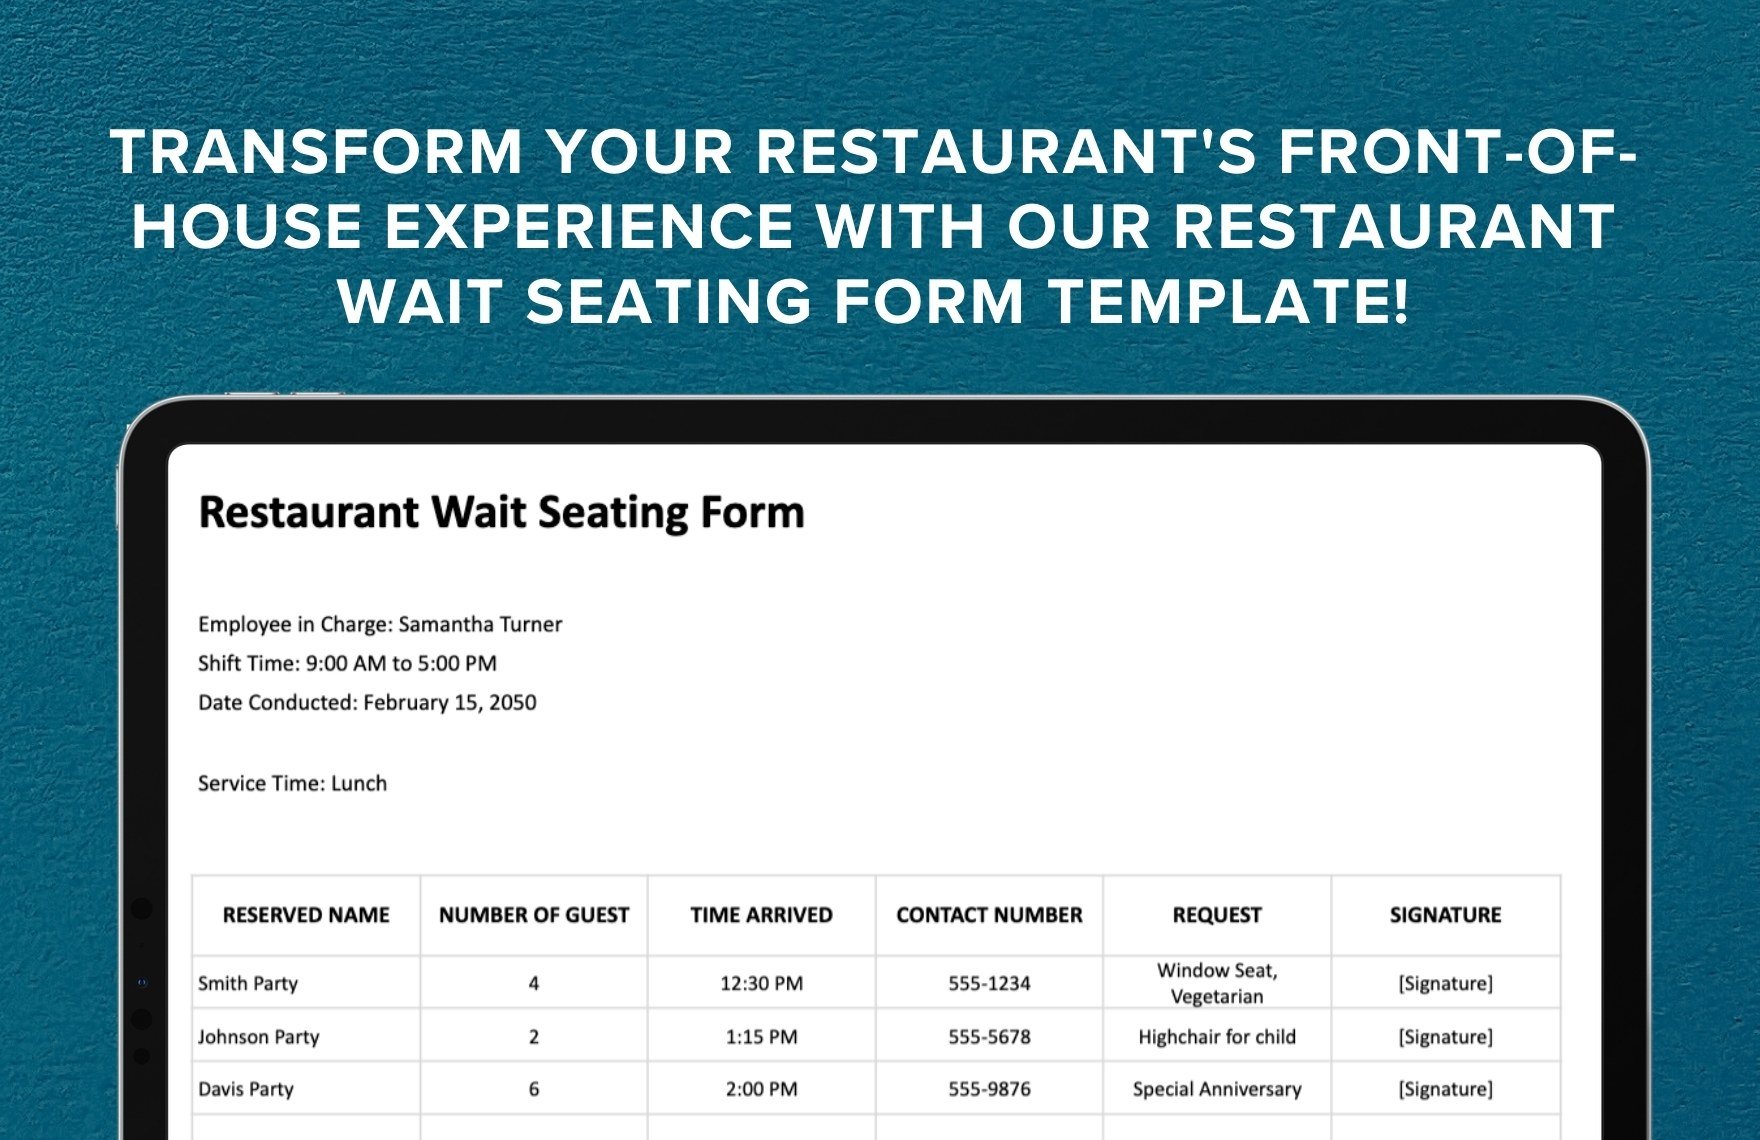 Restaurant Wait Seating Form Template